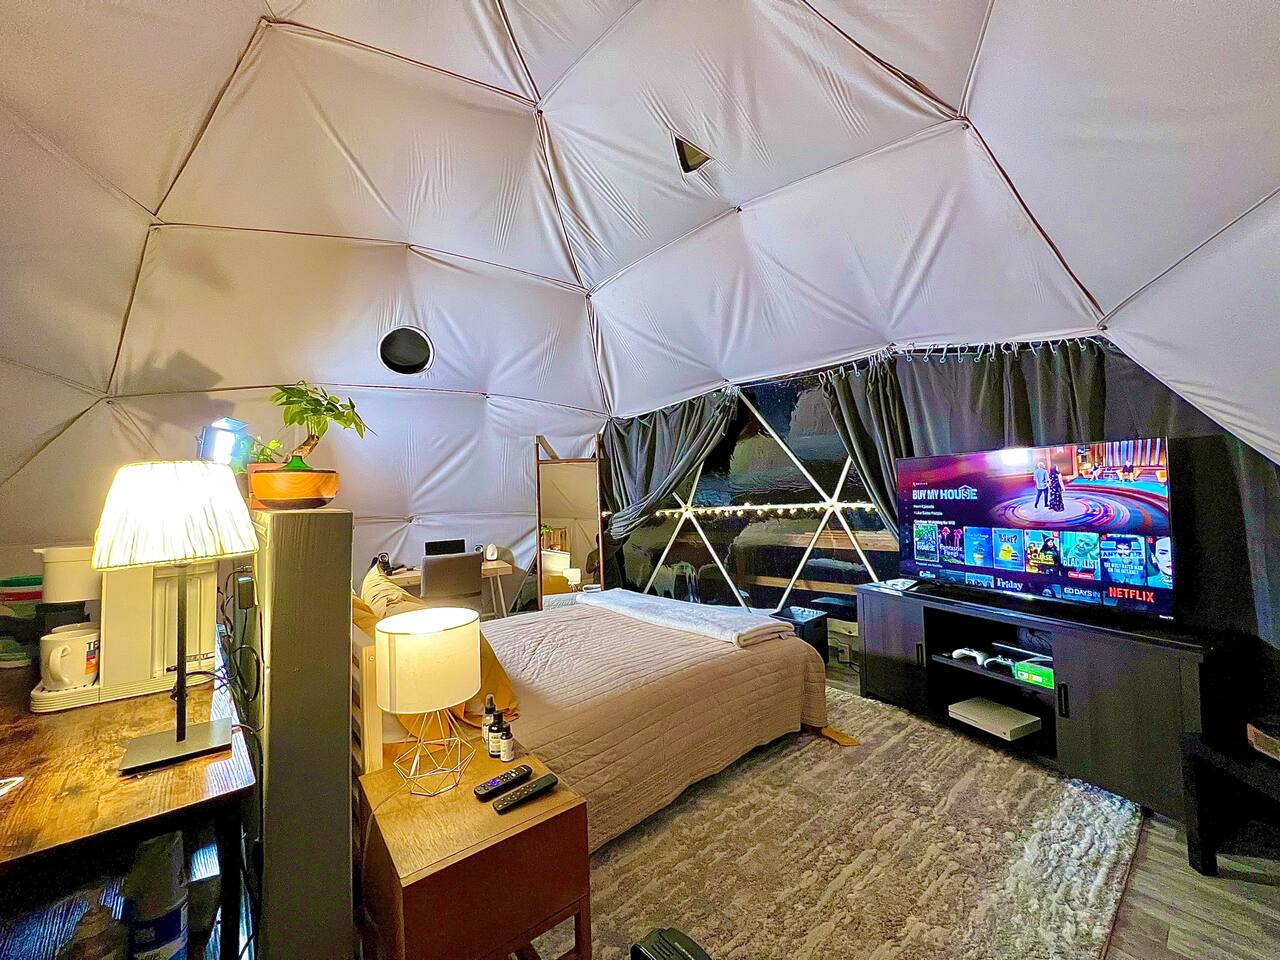 interior of a geodesic dome with a view of the bed, tv and window during the night